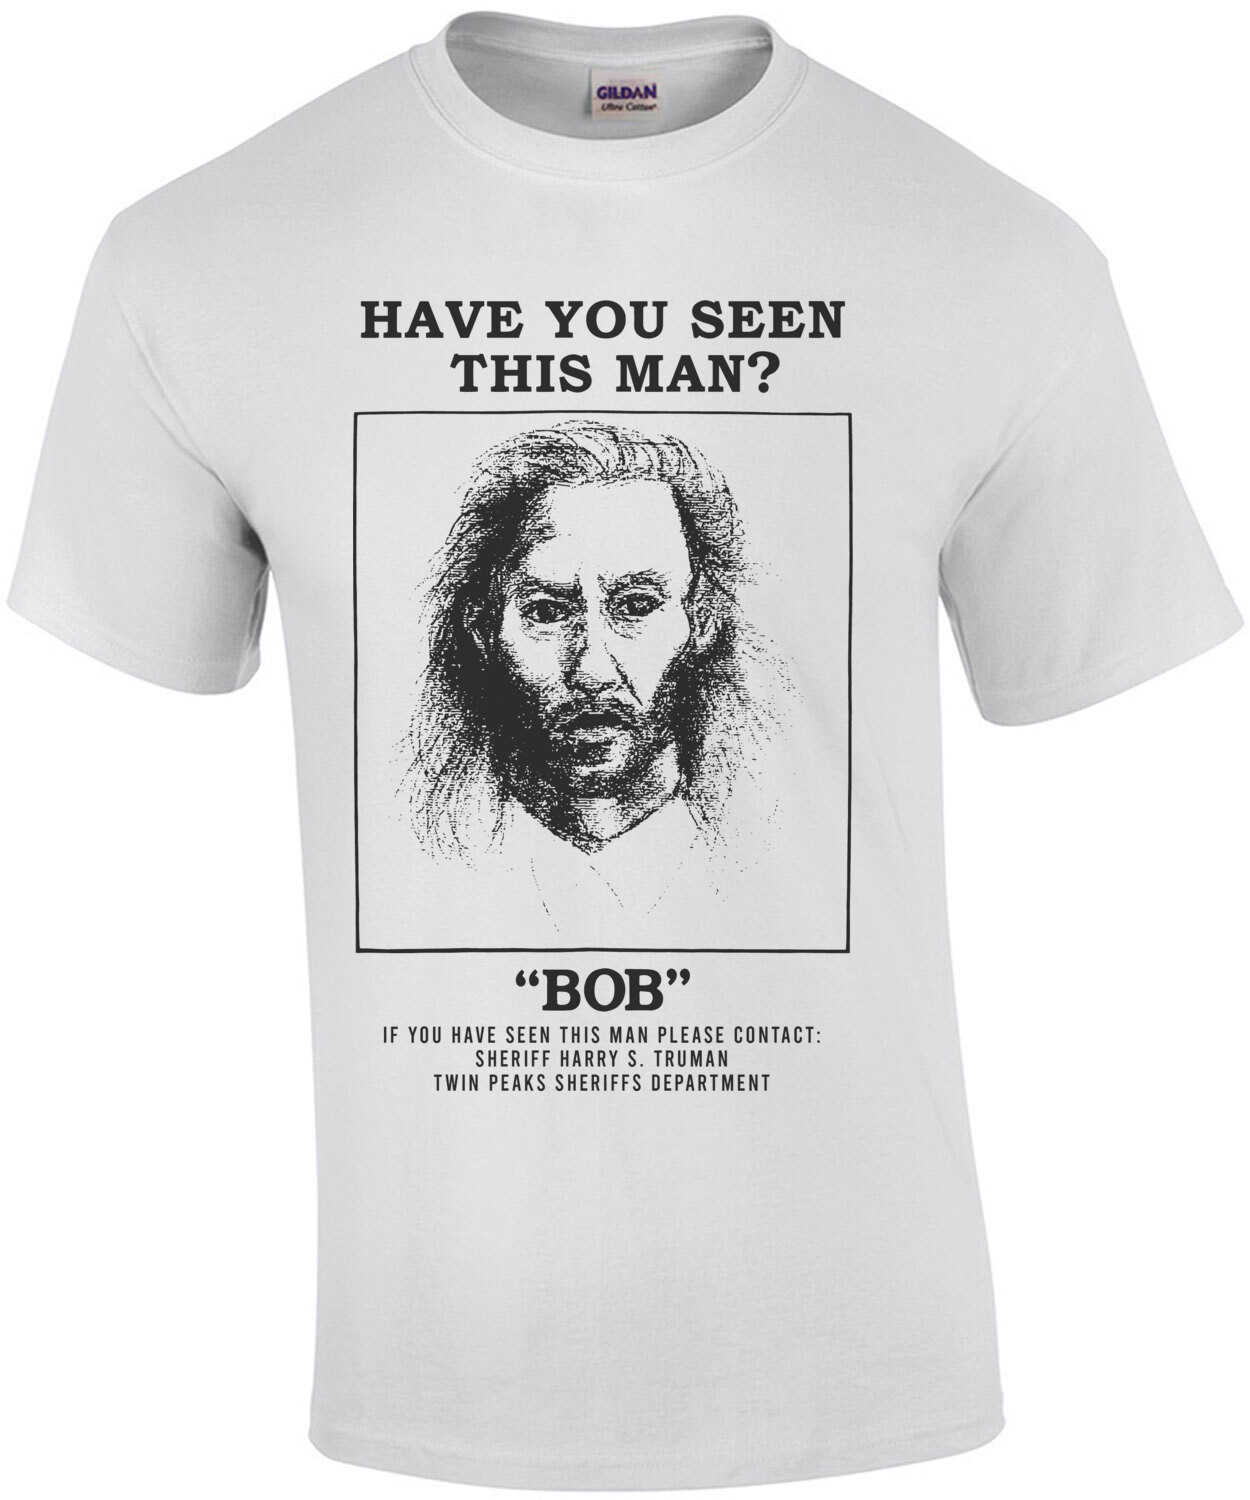 Have you seen this man? - Twin Peaks - 90's T-Shirt